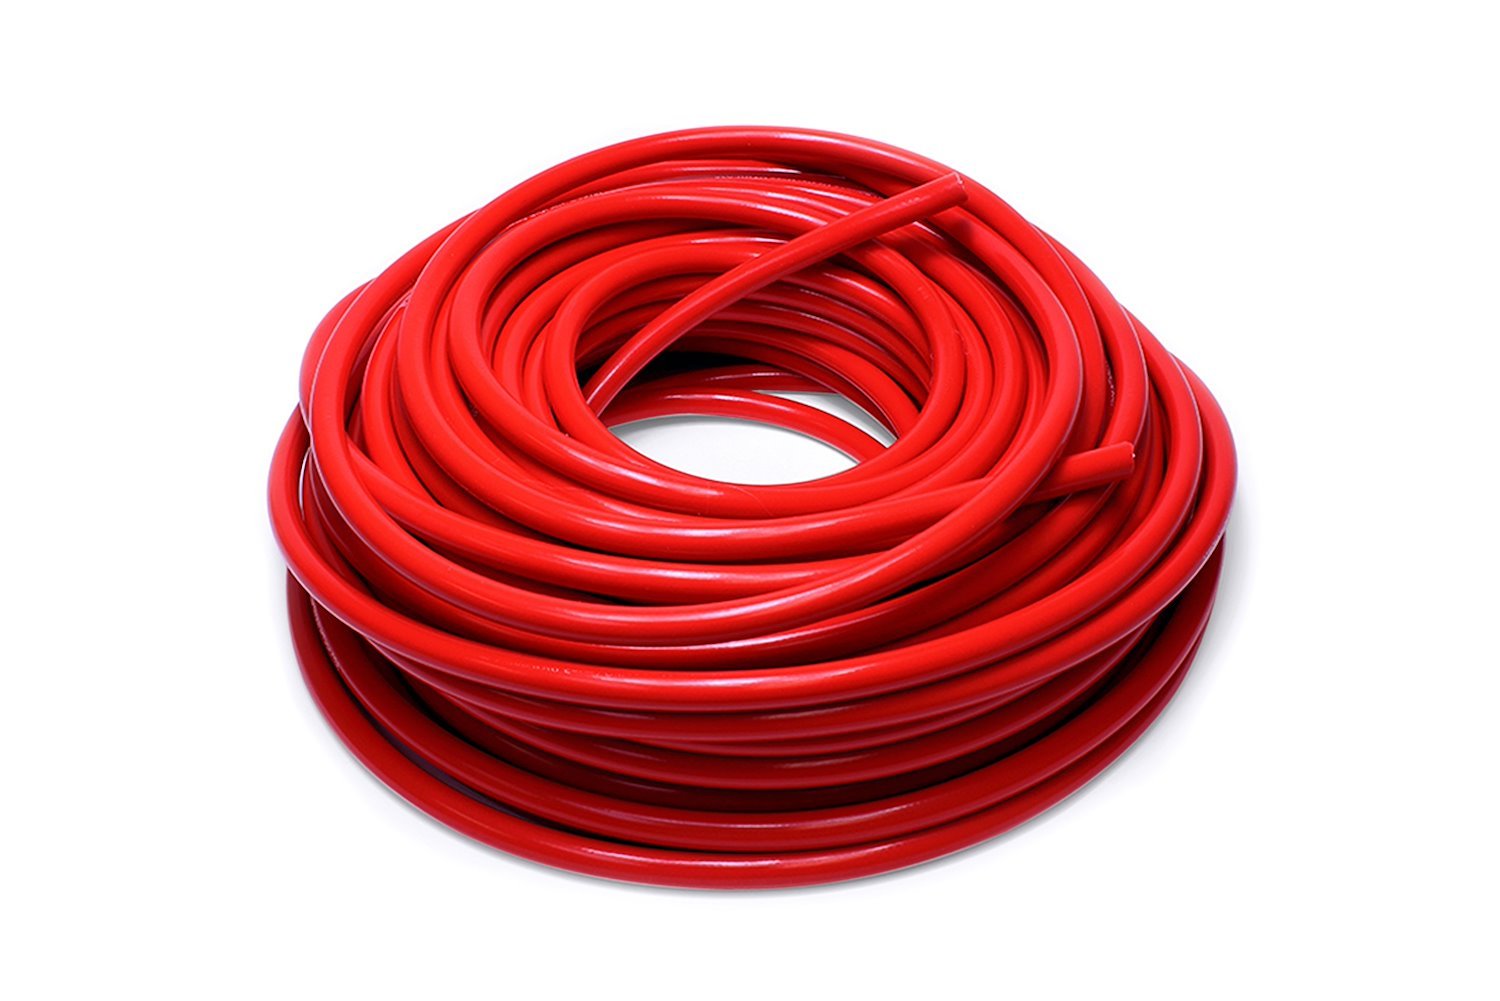 HTHH-062-REDx250 Silicone Heater Hose Tubing, High-Temp 1-Ply Reinforced, 5/8 in. ID, 250 ft. Roll, Red